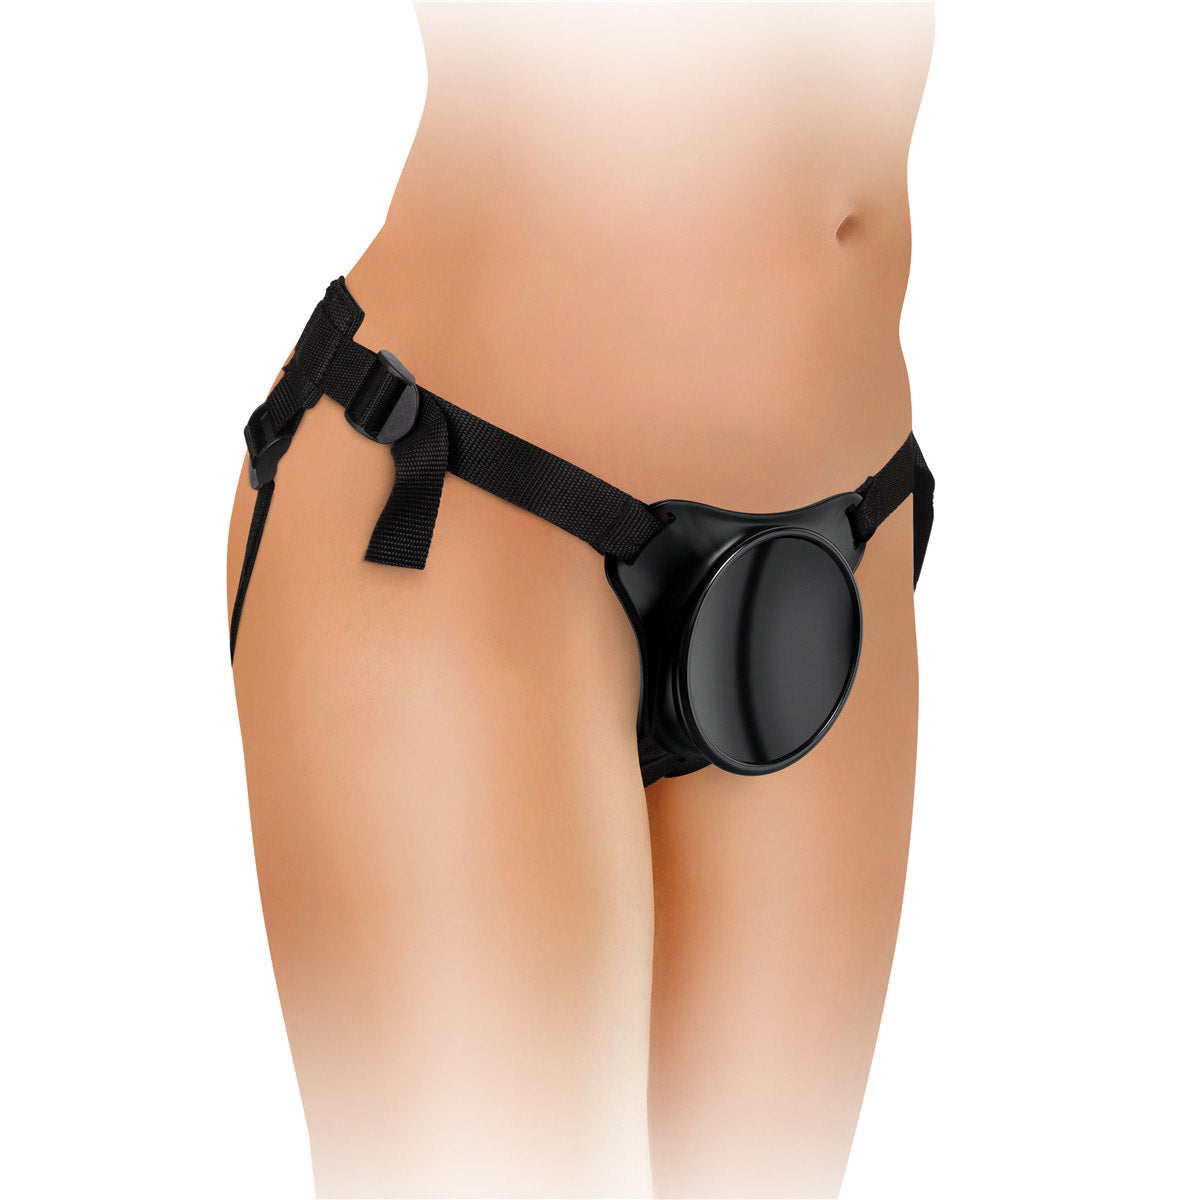 Beginner's Body Dock Strap-On Harness - Thorn & Feather